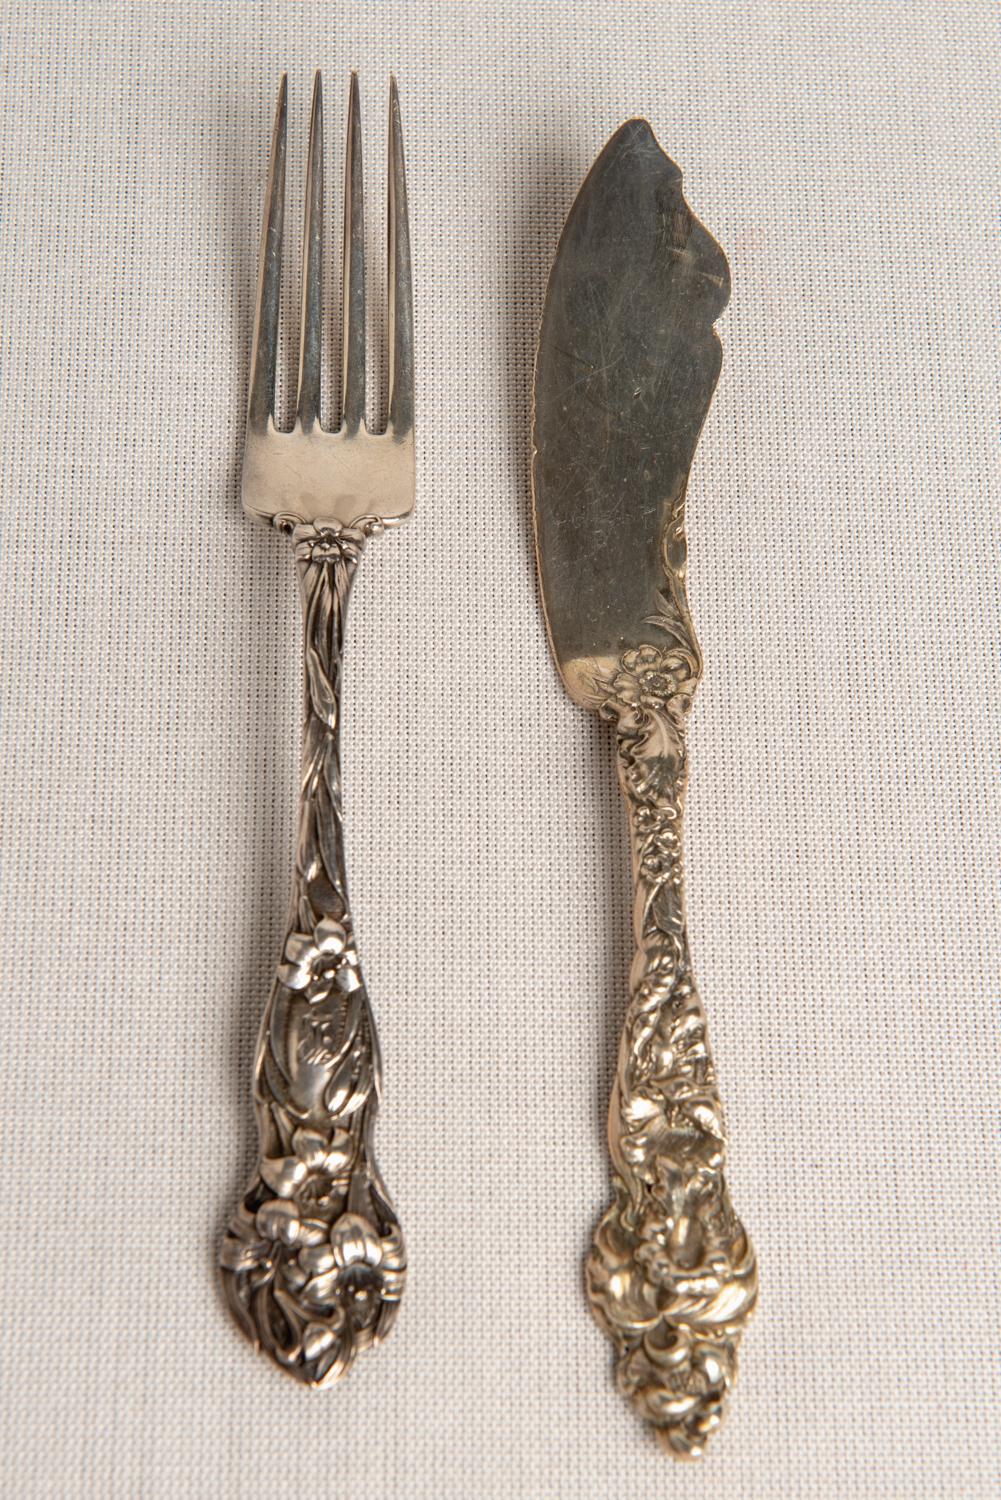 Beaded Some Silverware : Cake Scoop, Fork, Spoon for Ice For Sale